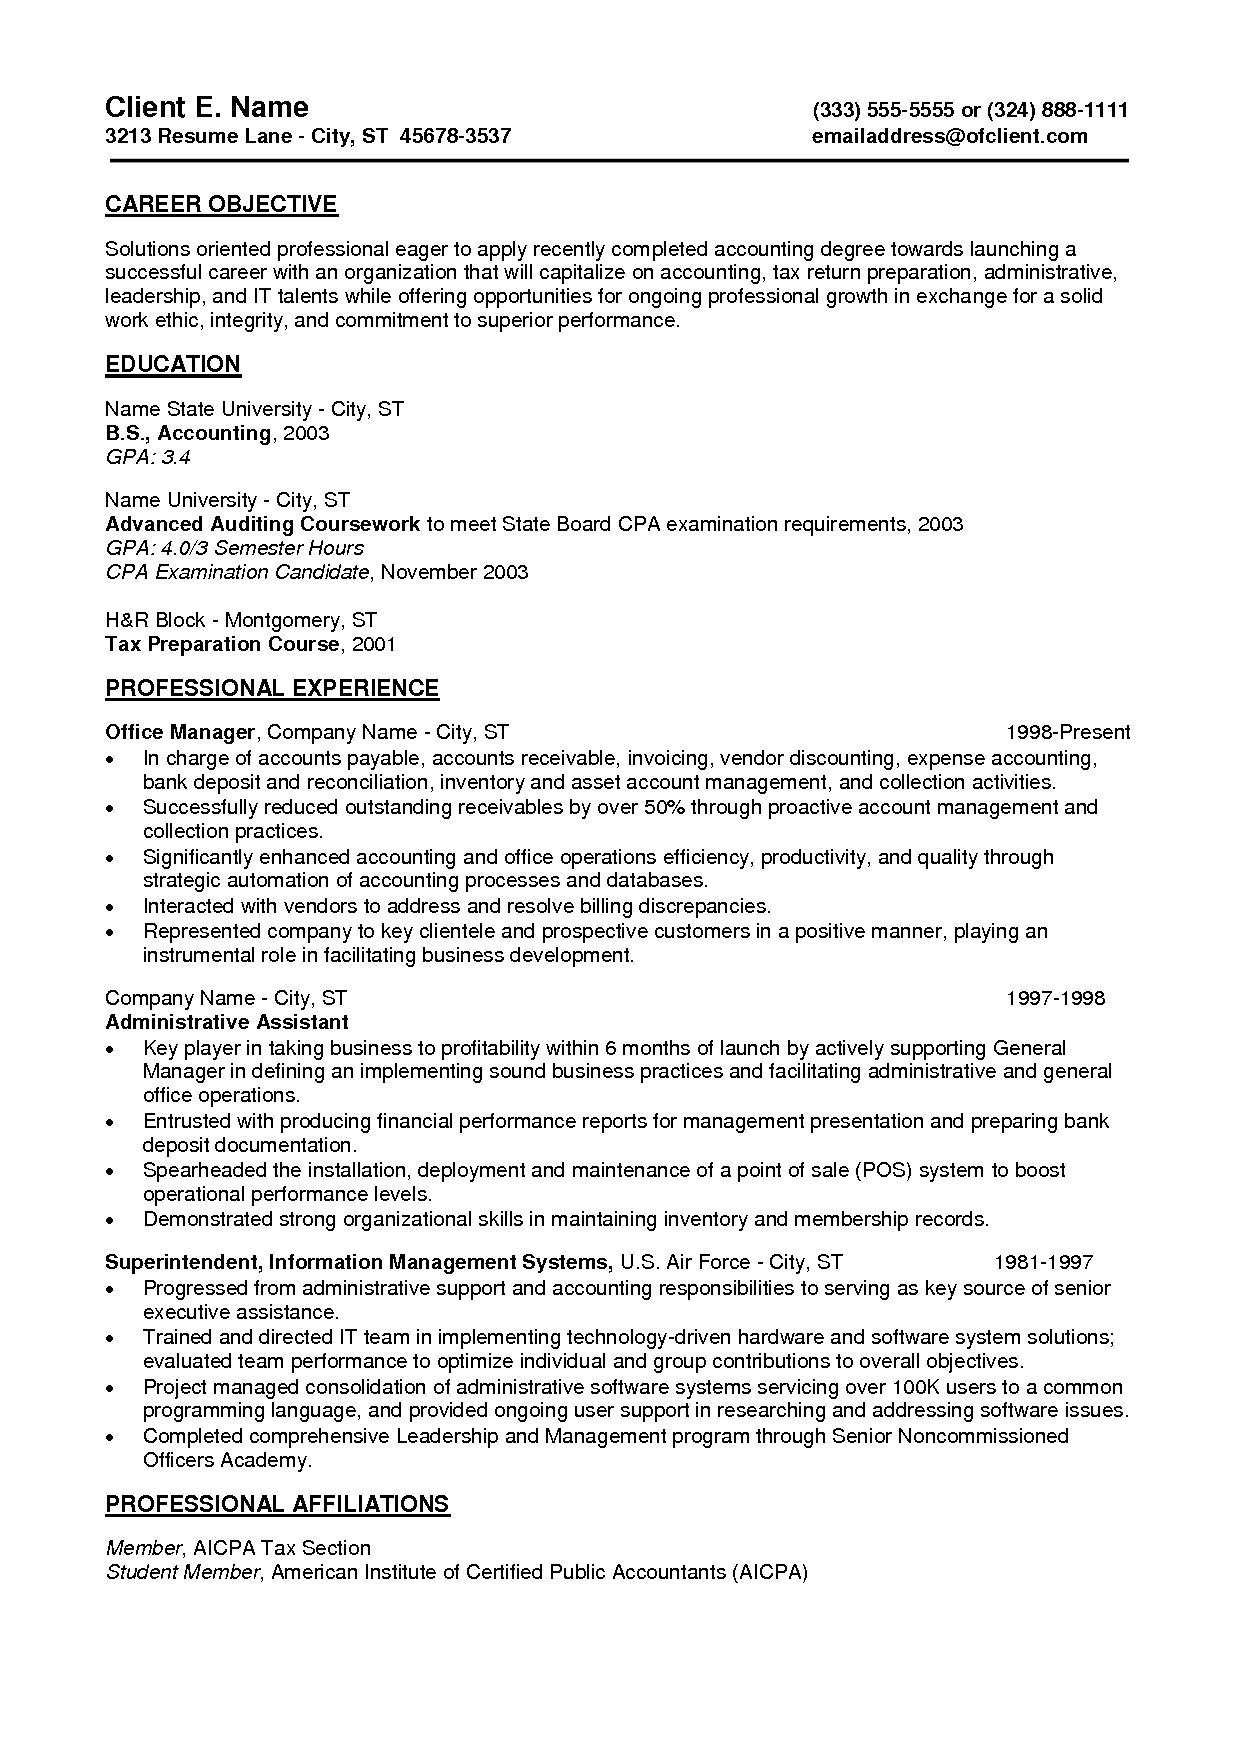 Resume Summary Examples Resume Summary Examples Entry Level 11 New Thoughts About Grad Katela